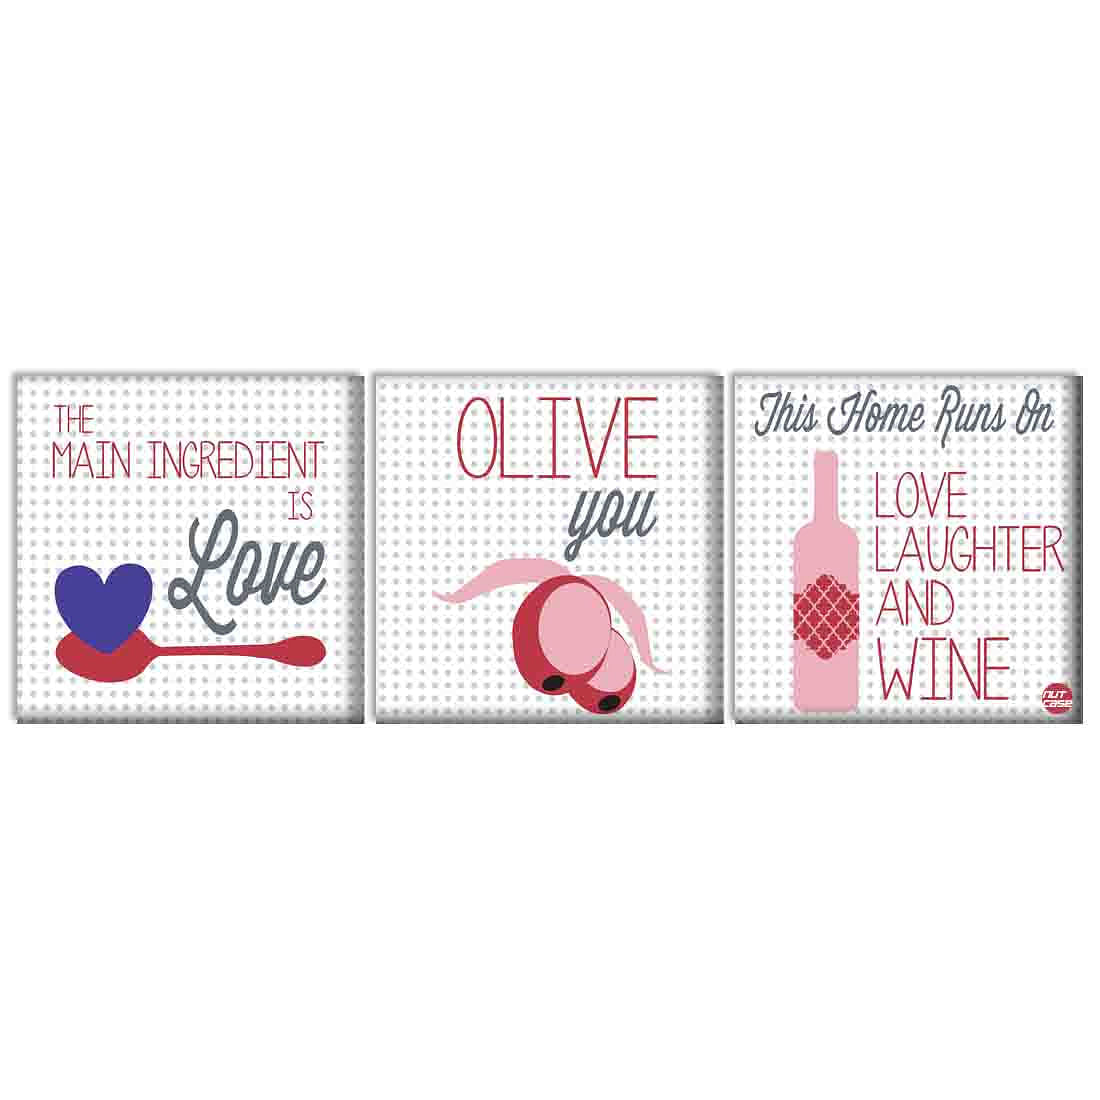 Wall Art Decor Hanging Panels Set Of 3 -Love Laughter And Wine Nutcase